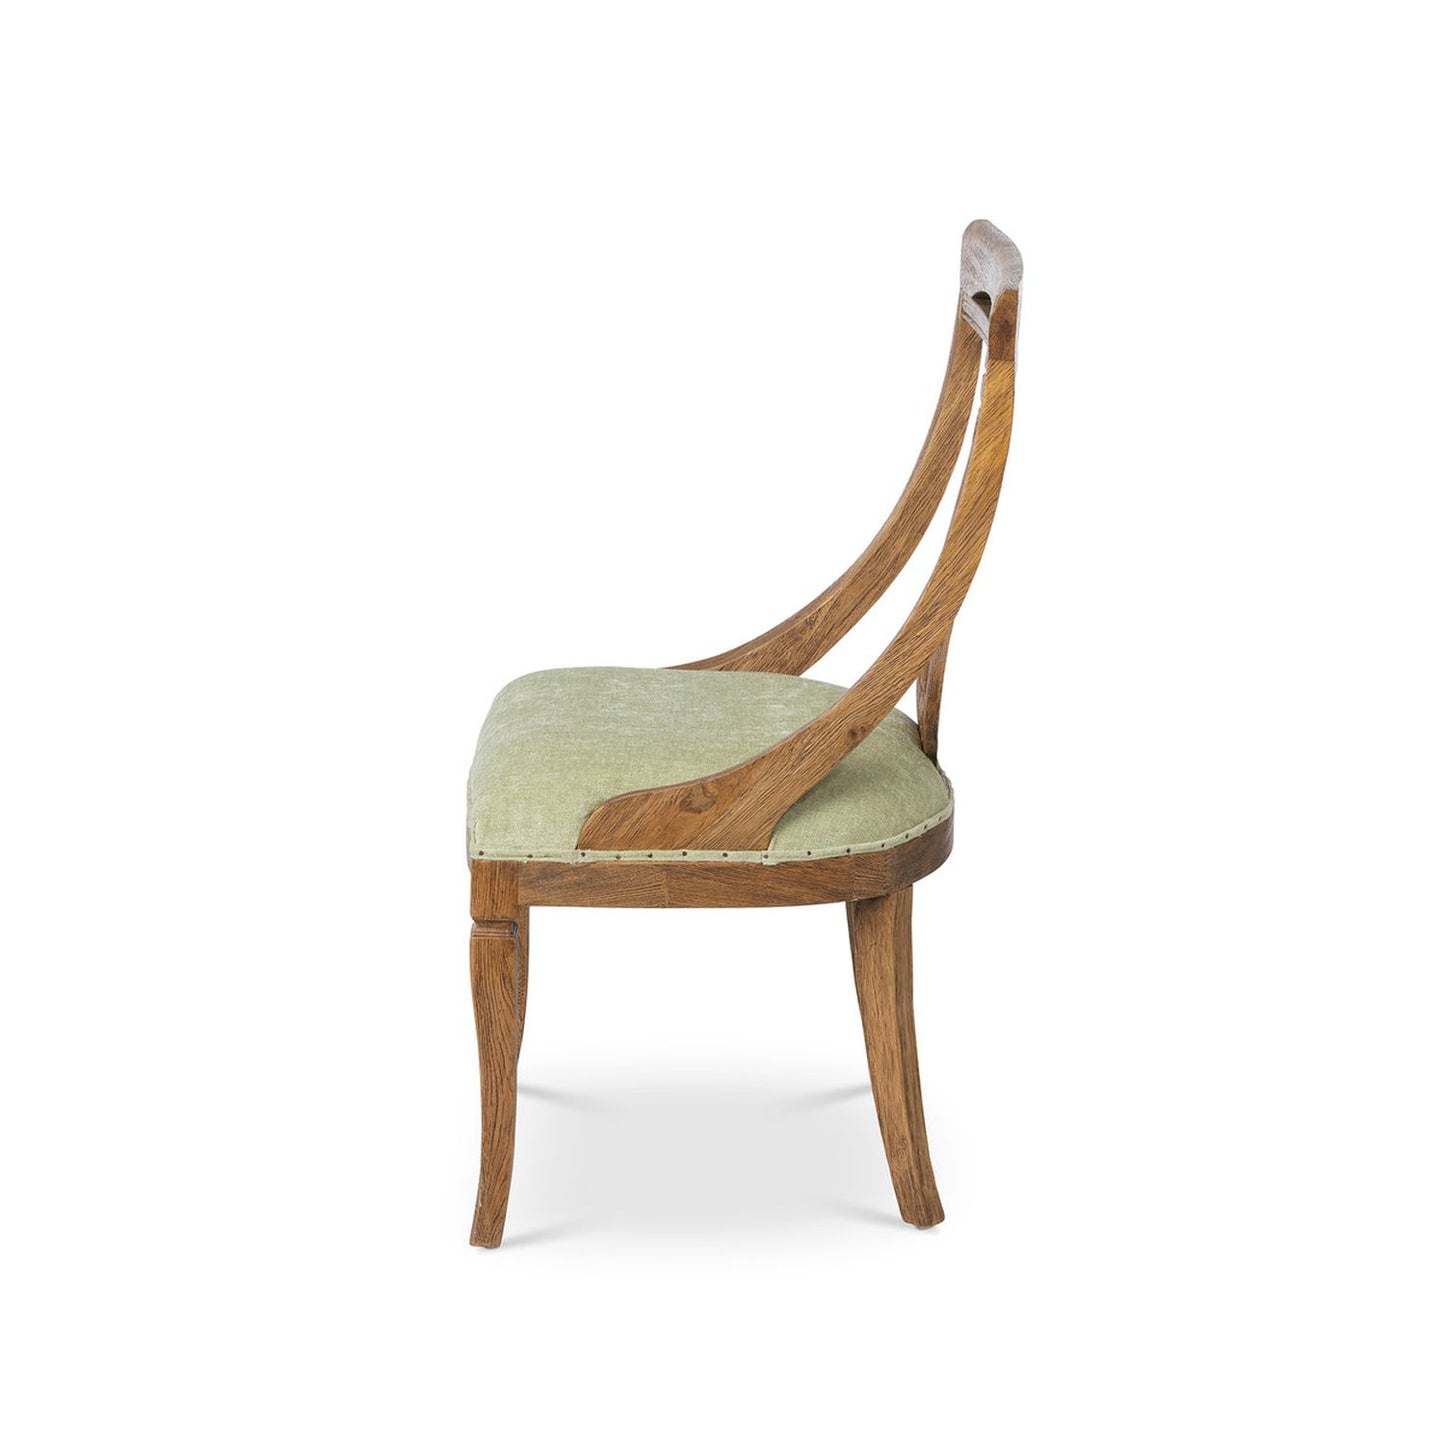 Park Hill Collection Southern Classic Viola Dining Chair